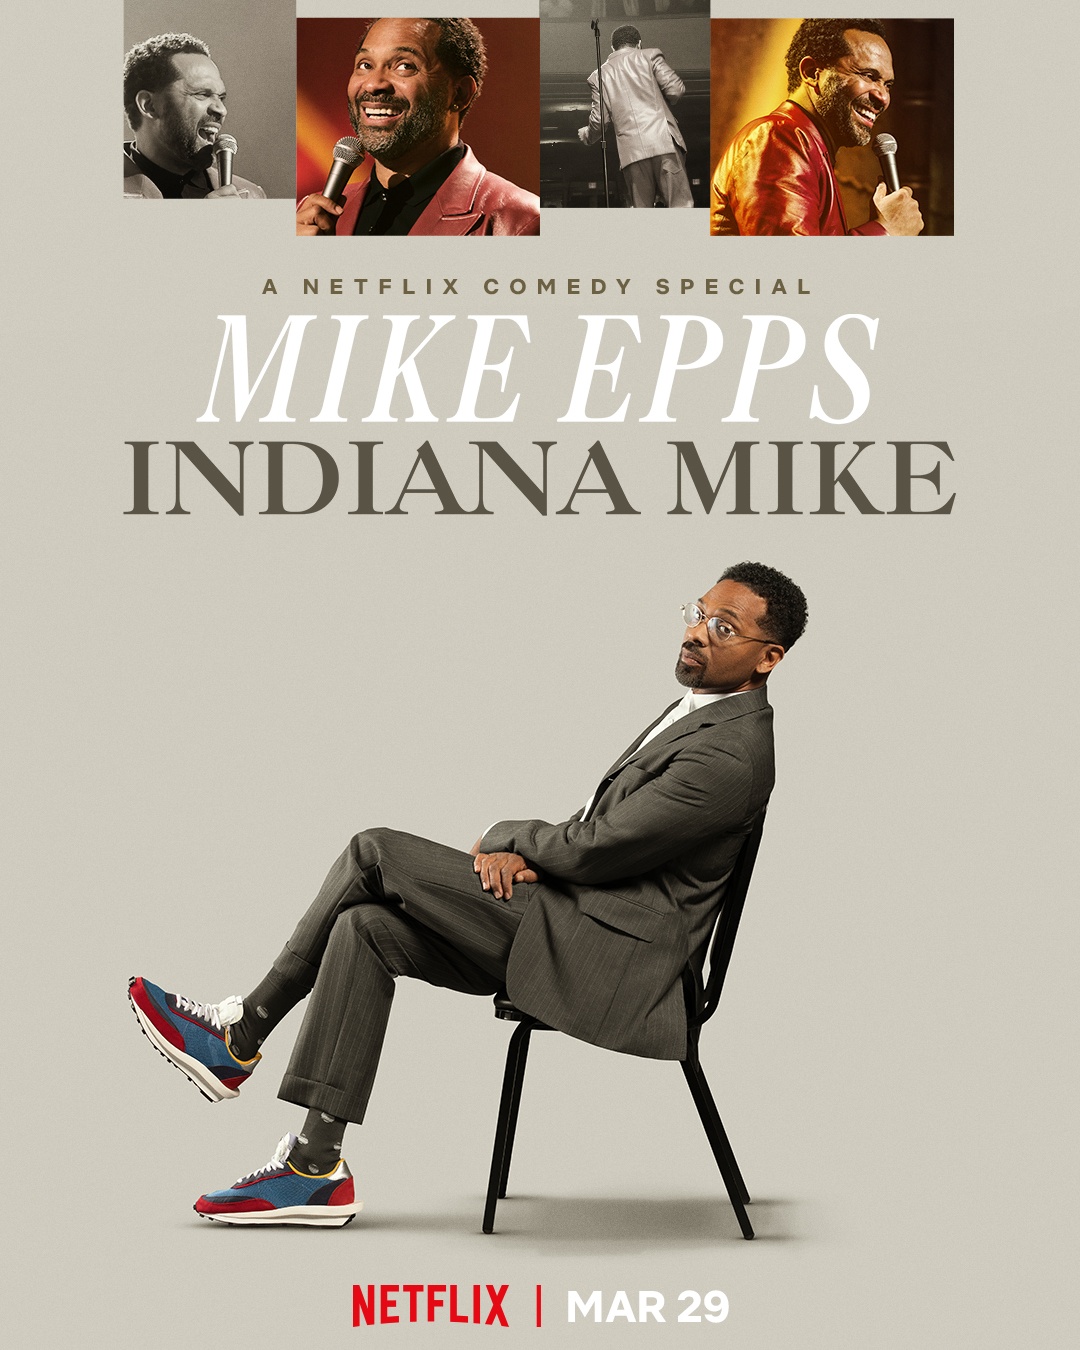 Netflix Special: ‘Mike Epps Indiana Mike’